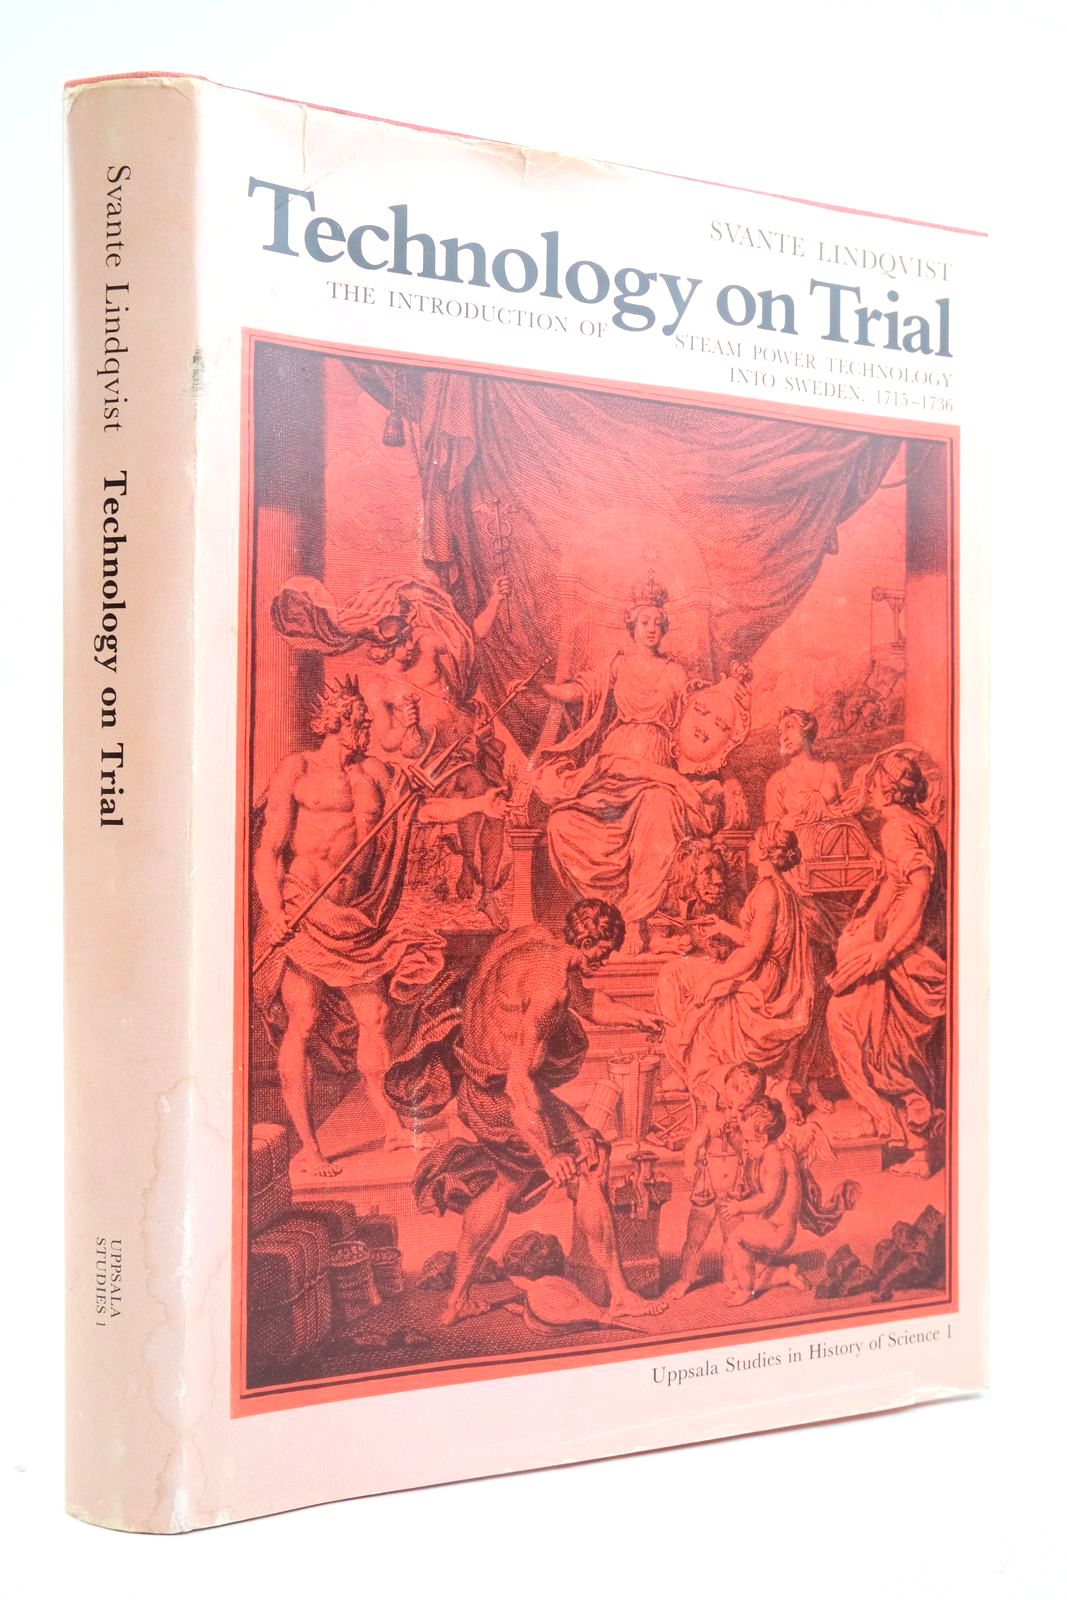 Photo of TECHNOLOGY ON TRIAL: THE INTRODUCTION OF STEAM POWER TECHNOLOGY INTO SWEDEN. 1715-1736 written by Lindqvist, Svante published by Almquist & Wiksells, Uppsala (STOCK CODE: 2136119)  for sale by Stella & Rose's Books